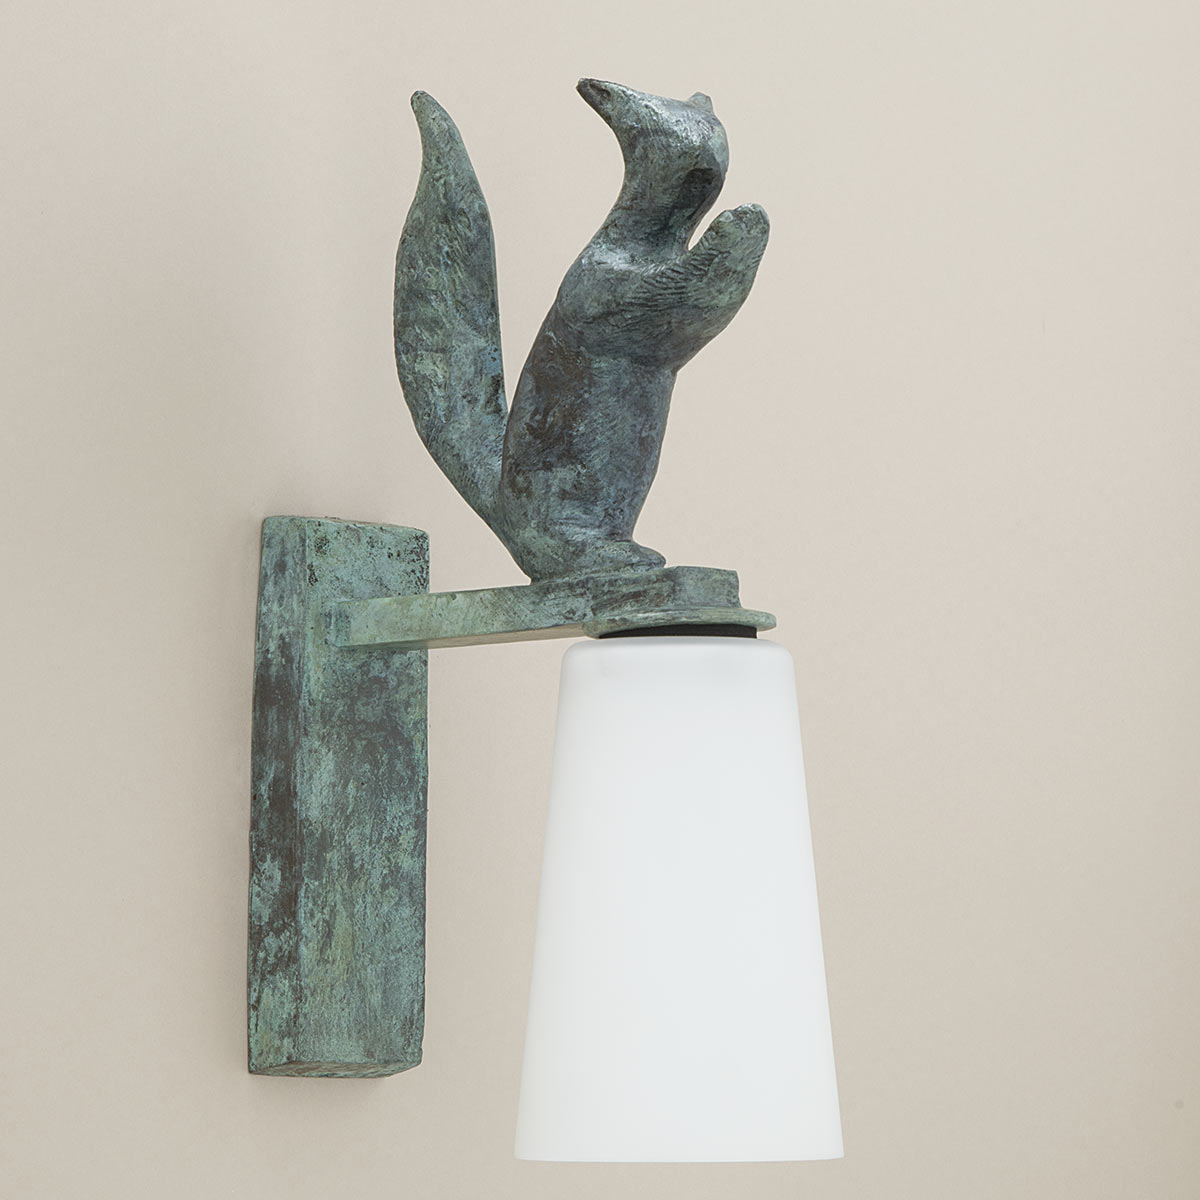 Charming wall light with squirrel decor made of cast bronze Edy